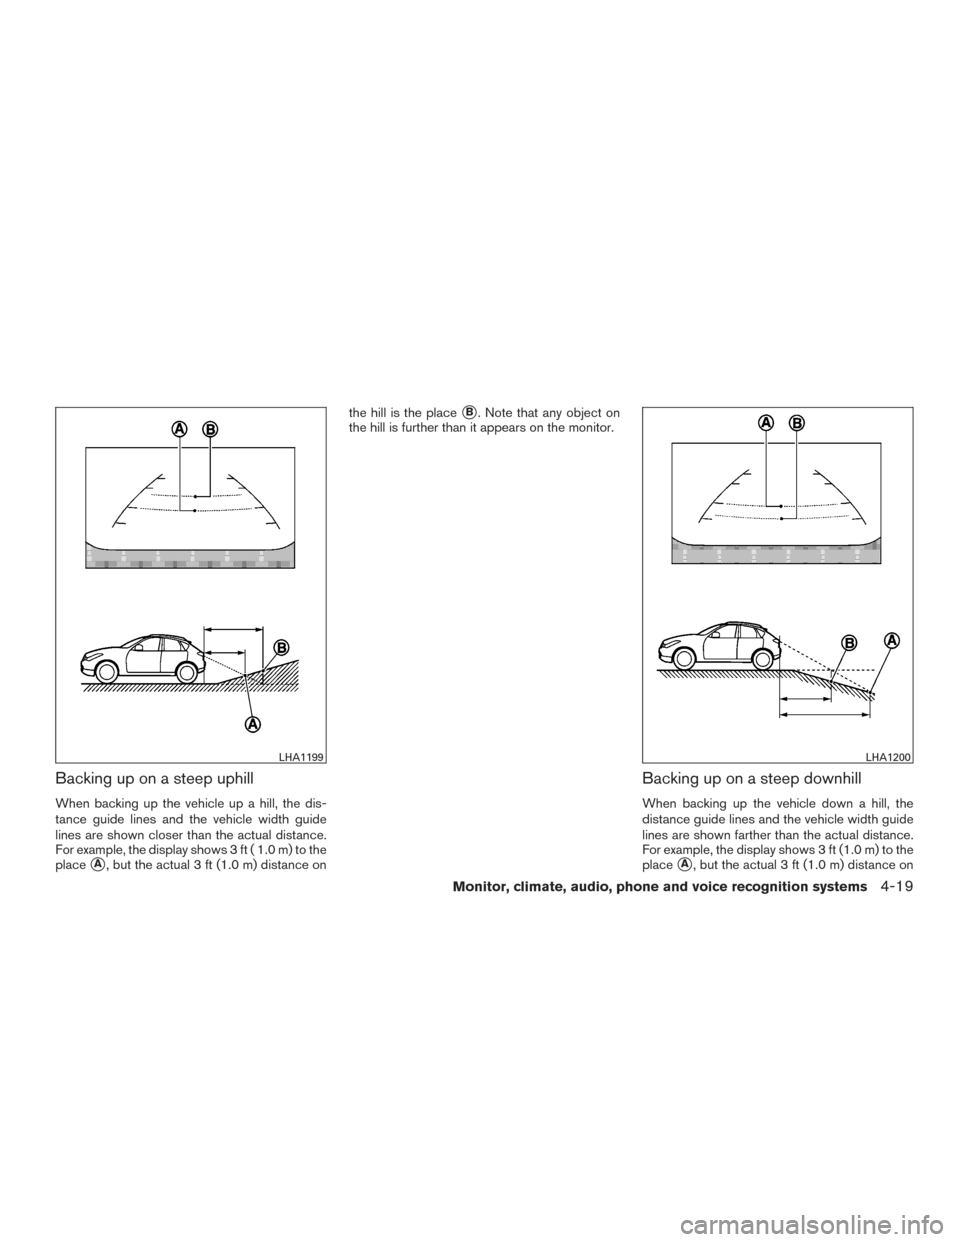 NISSAN VERSA NOTE 2015 2.G Owners Manual Backing up on a steep uphill
When backing up the vehicle up a hill, the dis-
tance guide lines and the vehicle width guide
lines are shown closer than the actual distance.
For example, the display sho